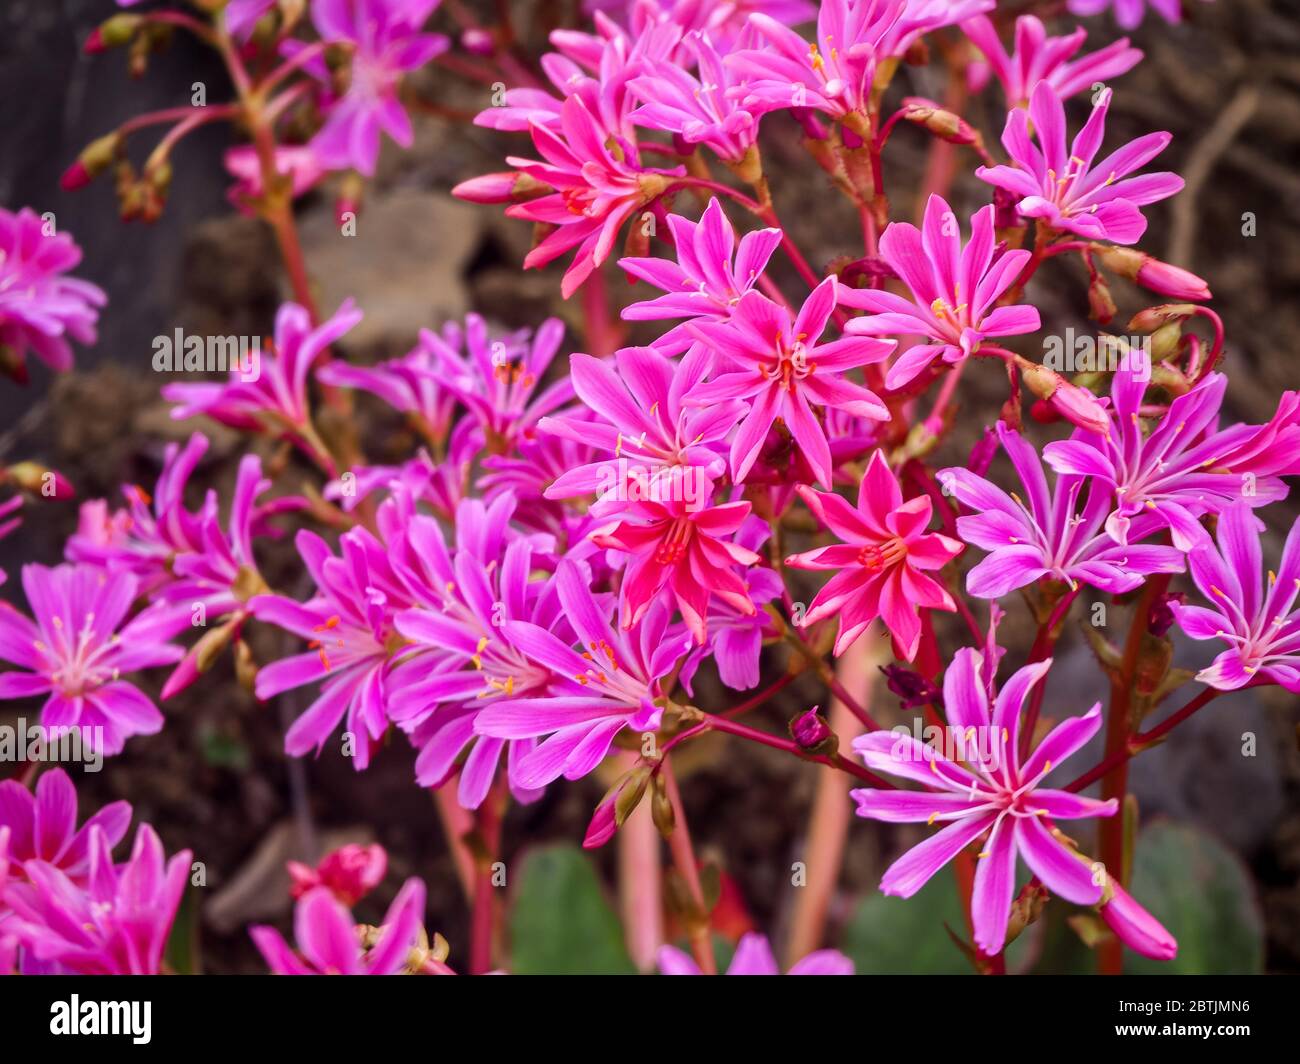 Closeup of the beautiful bright pink flowers of Lewisia cotyledon in a garden Stock Photo